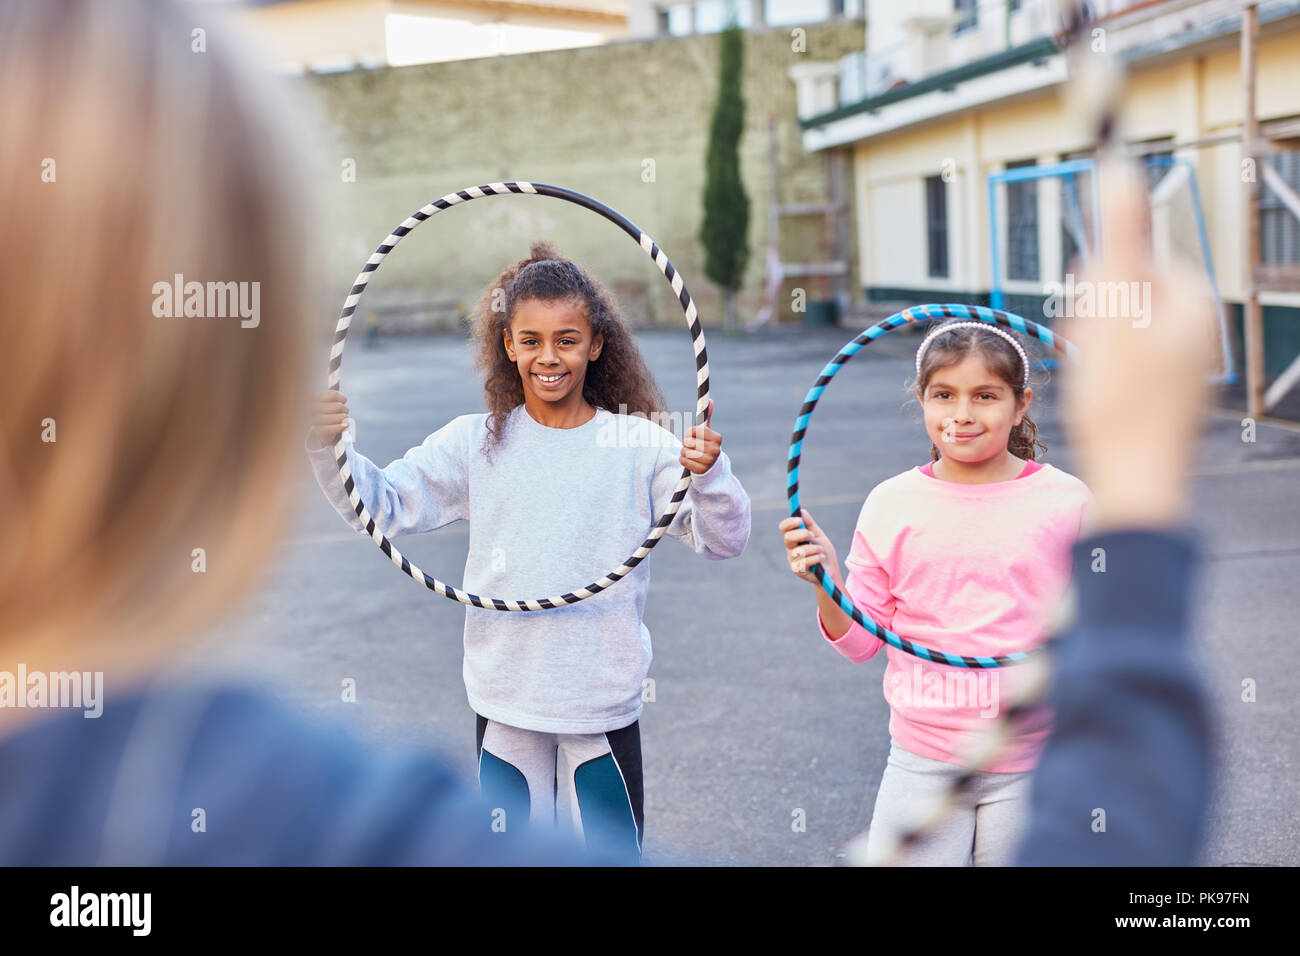 Girls do gymnastics with hoops at school sports or summer camp Stock Photo